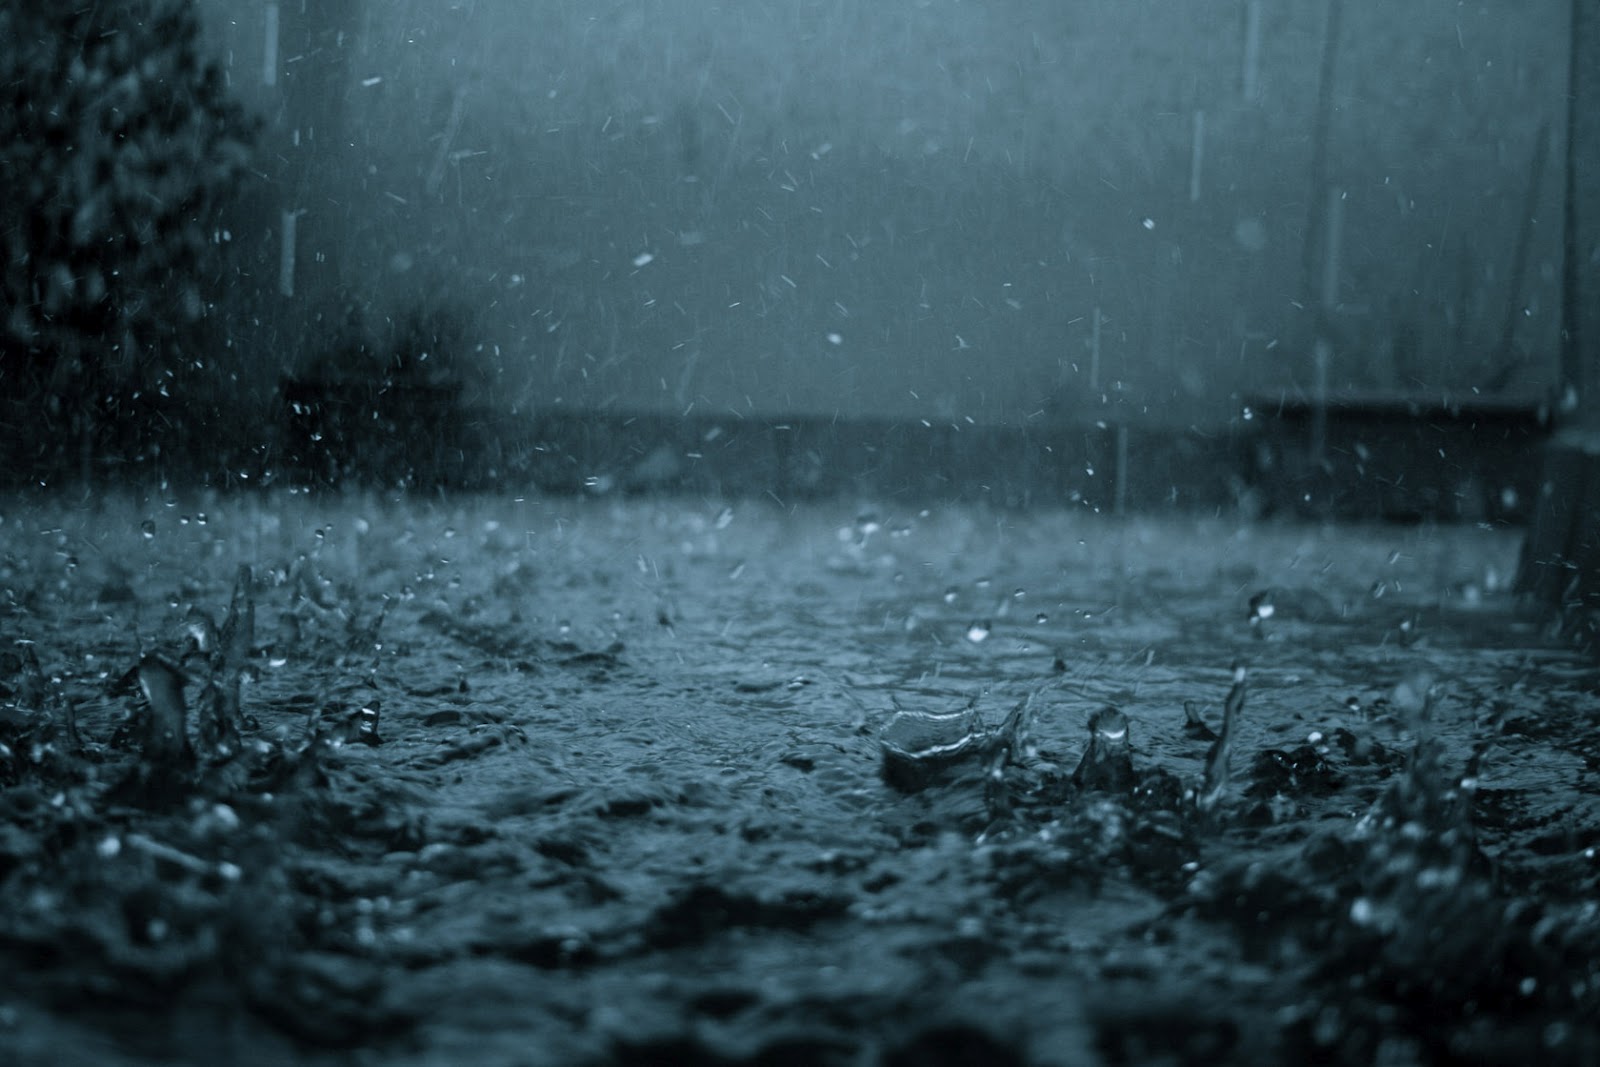  pictures rain pictures alone in rain pictures hd love wallpapers 1600x1067